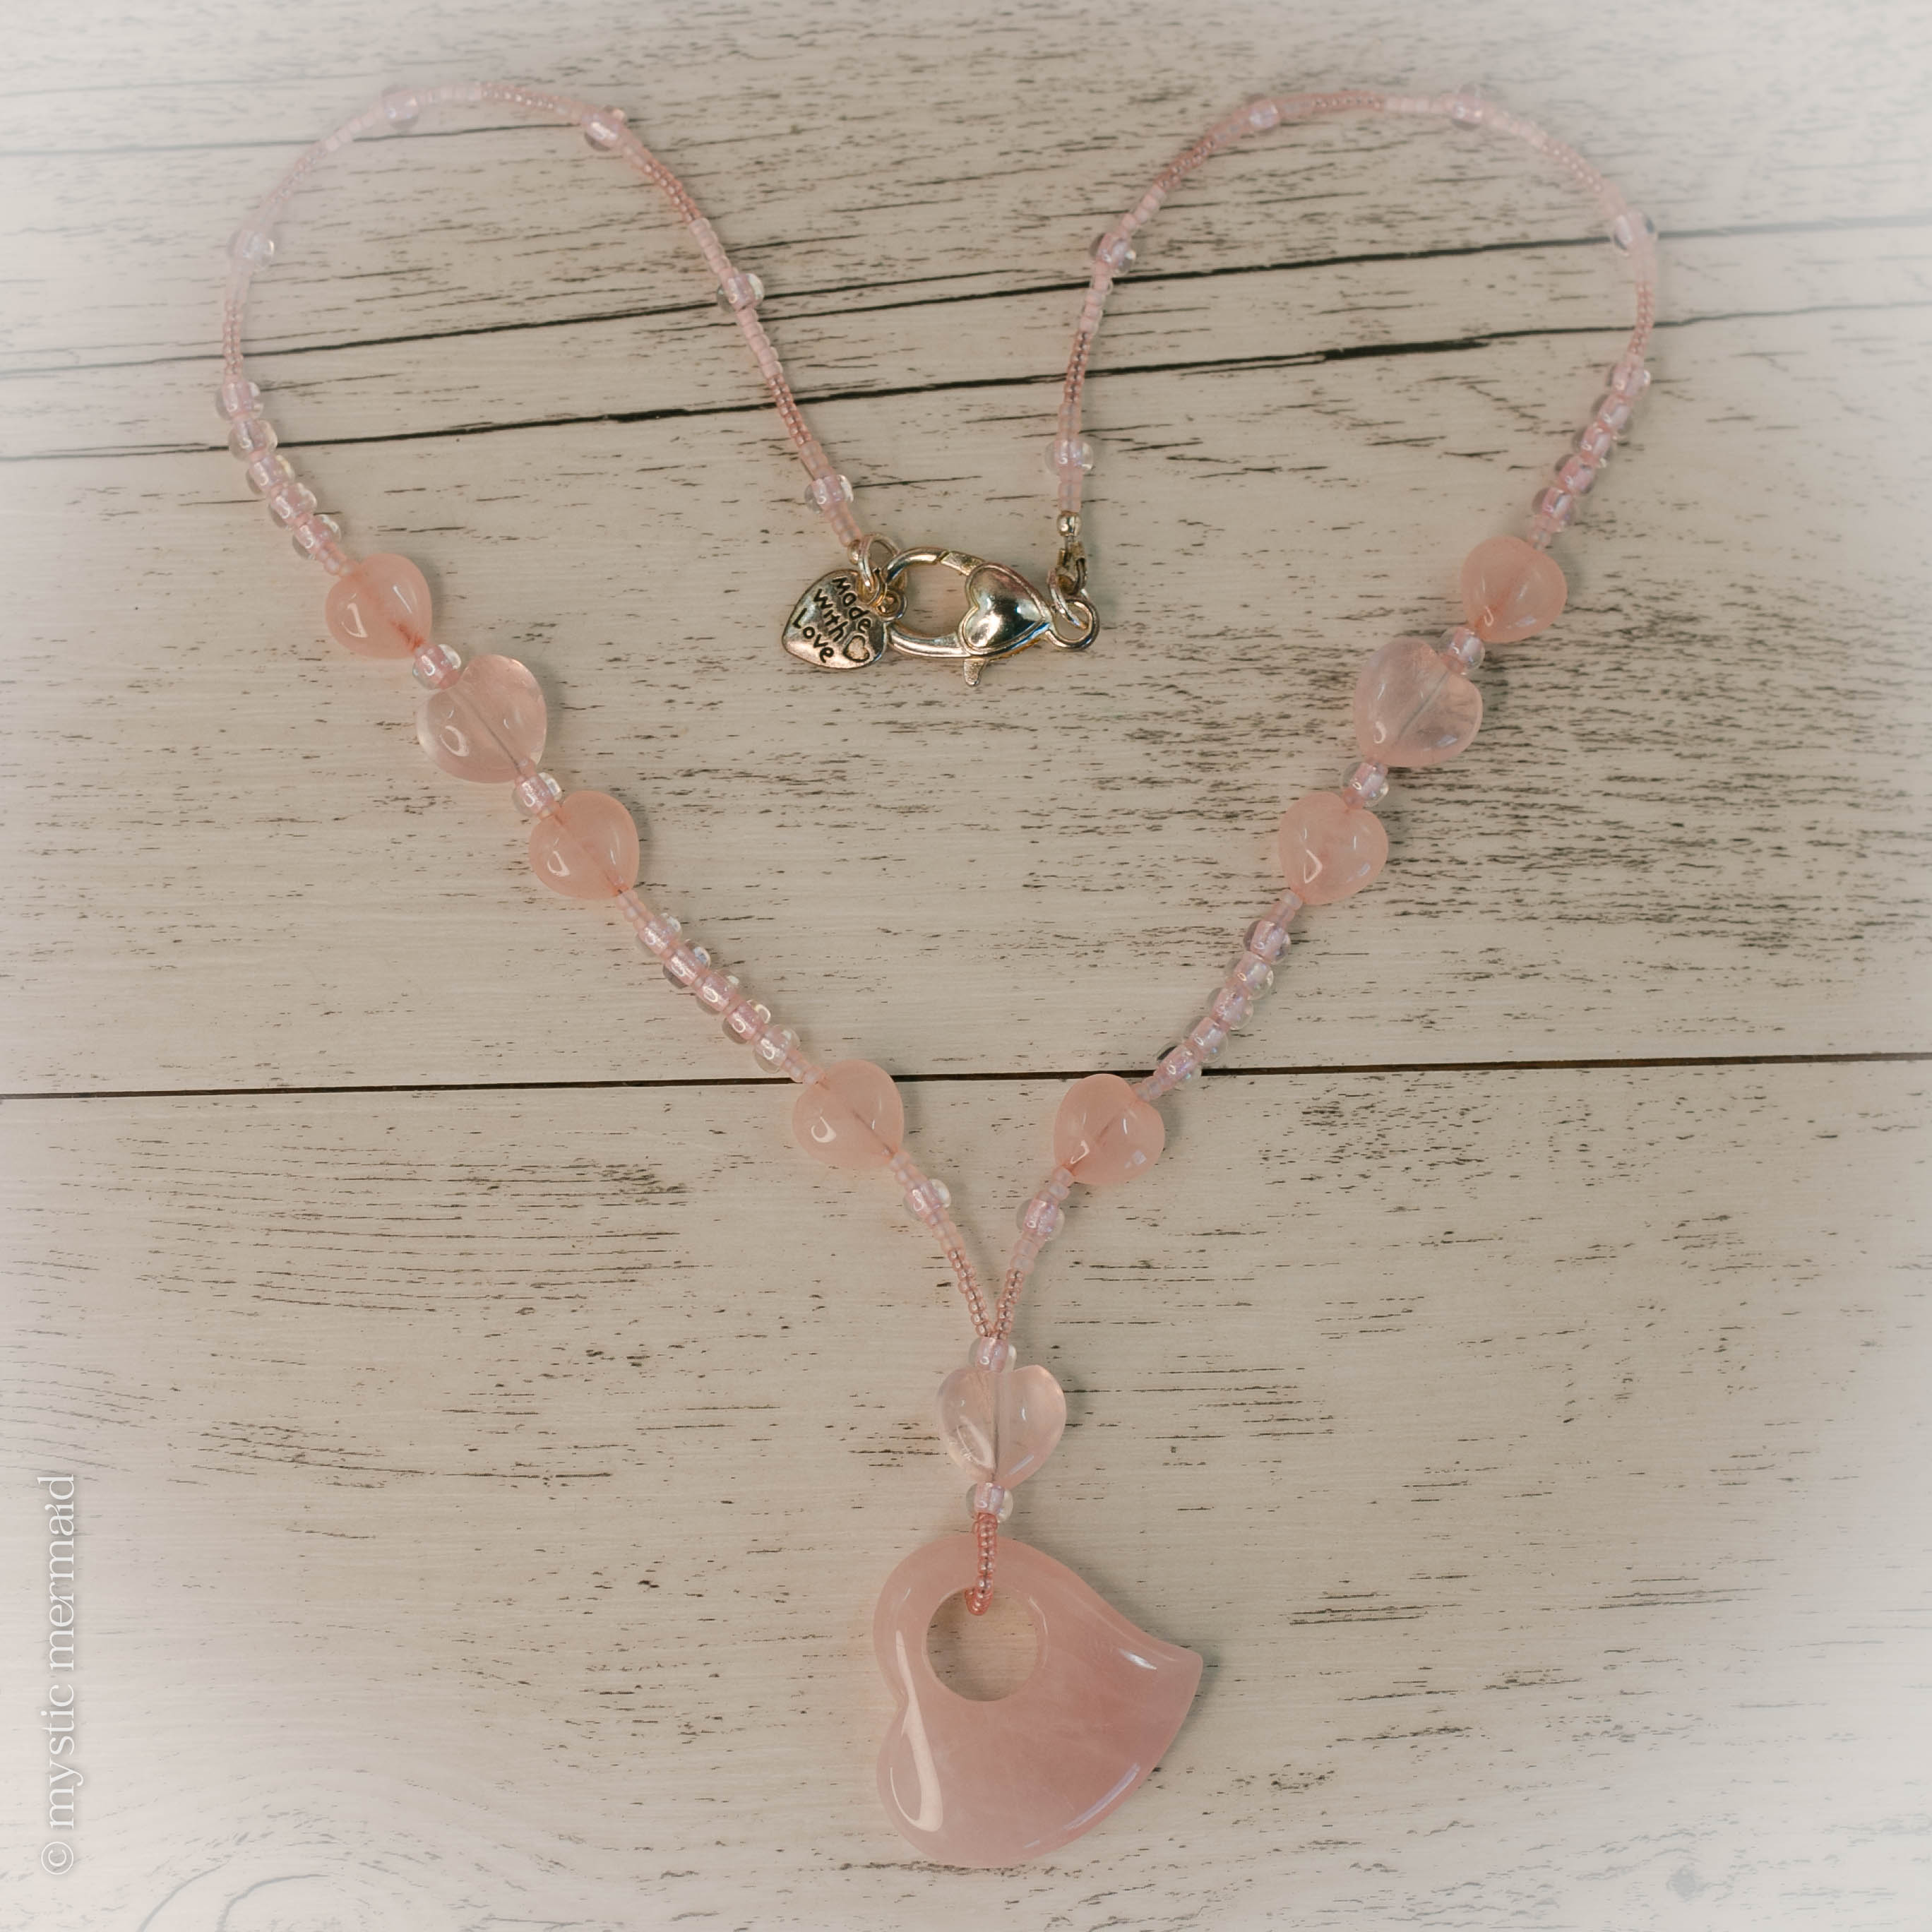 It's All About the Love - Floating Rose Quartz Heart Necklace